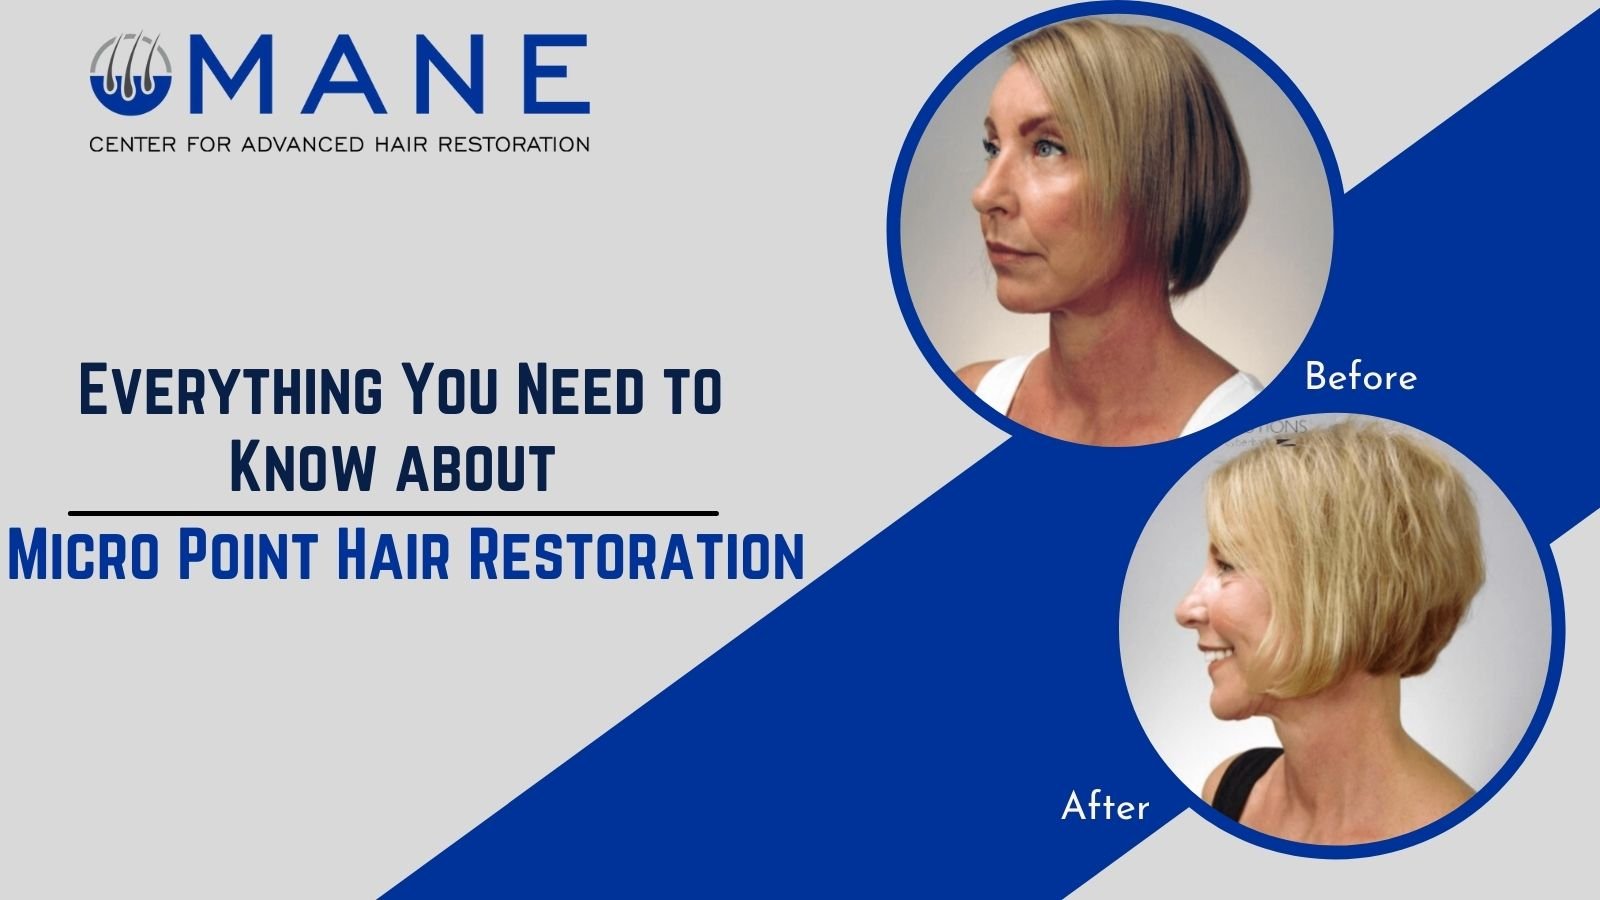 Everything You Need to Know about Micro Point Hair Restoration